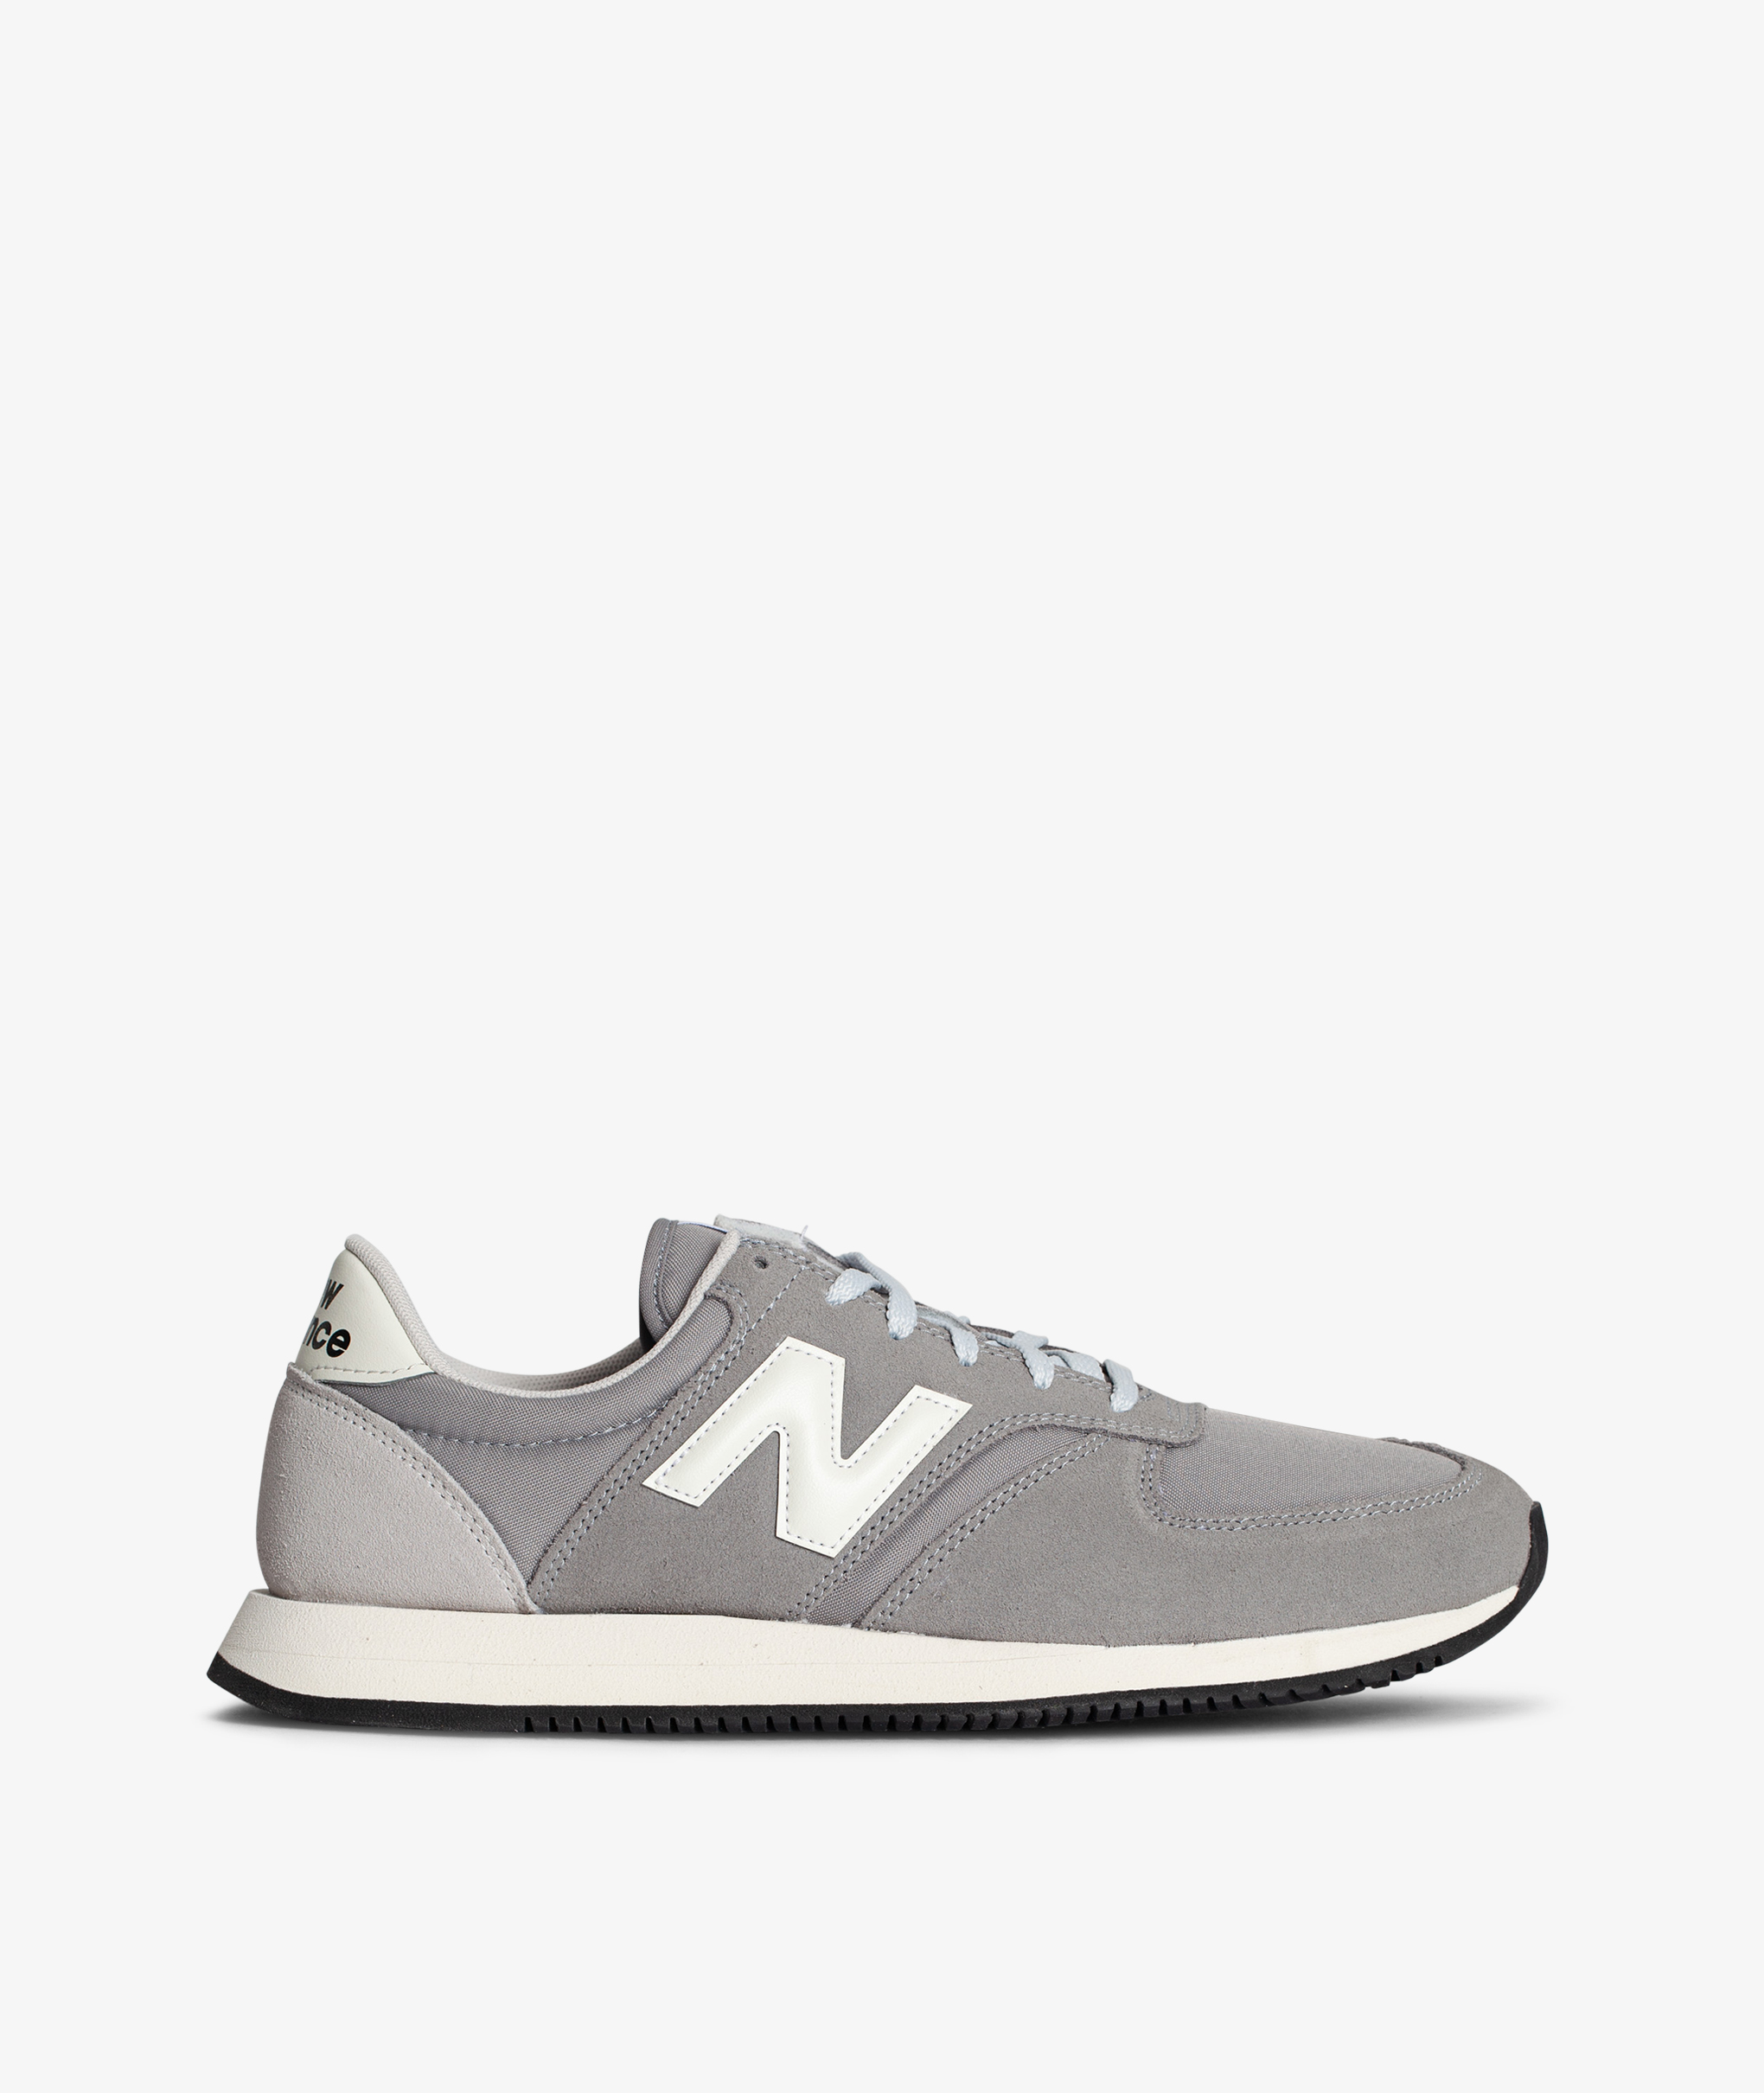 Pijlpunt Winst regering Norse Store | Shipping Worldwide - New Balance UL420V2